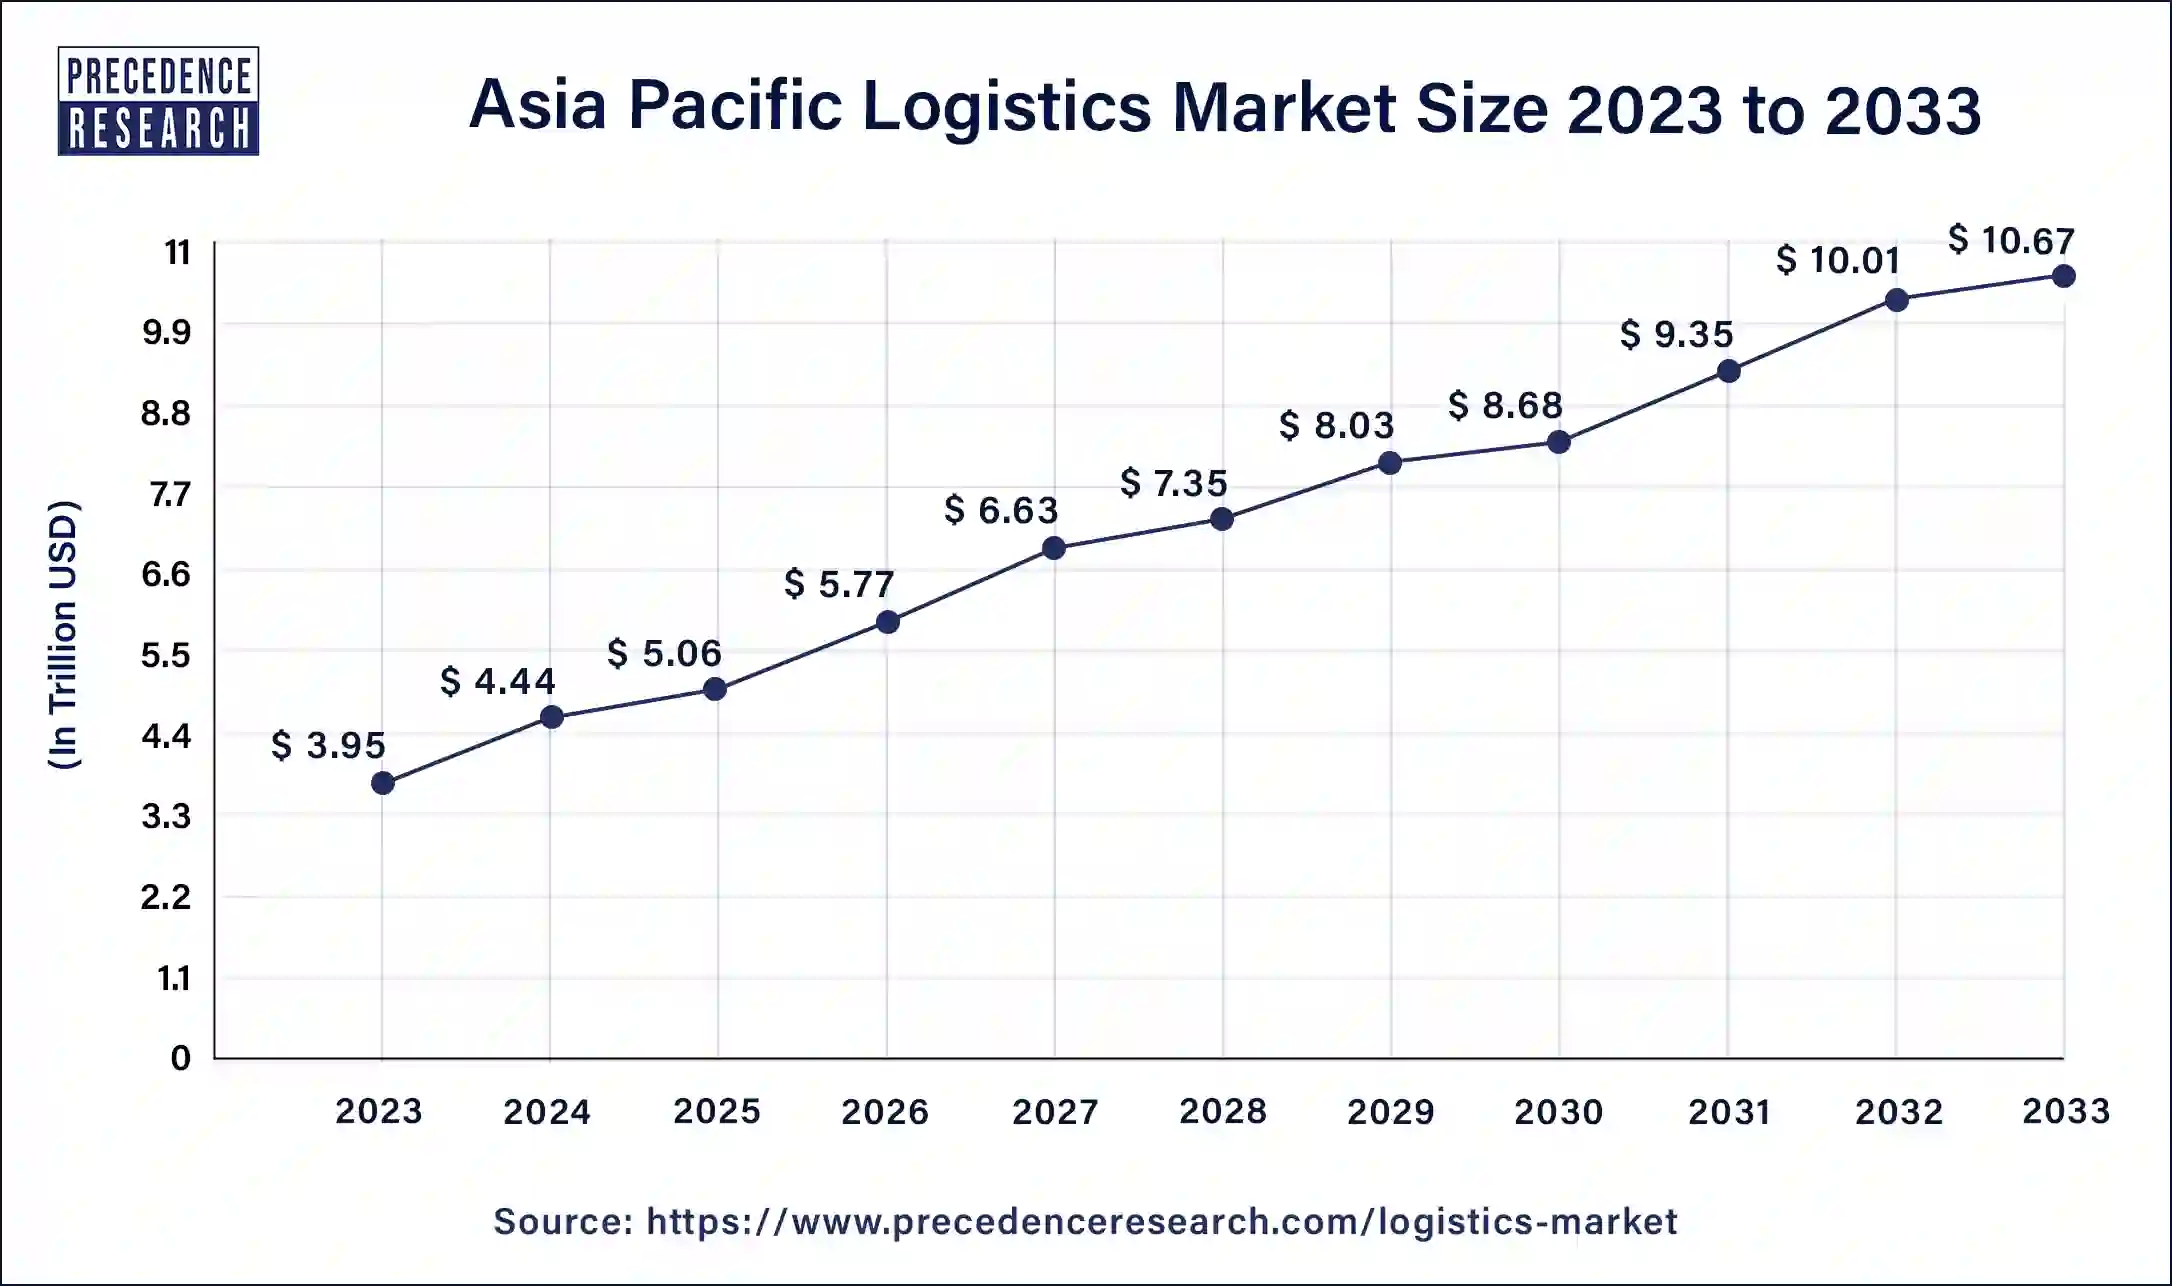 Asia Pacific Logistics Market Size 2024 to 2033